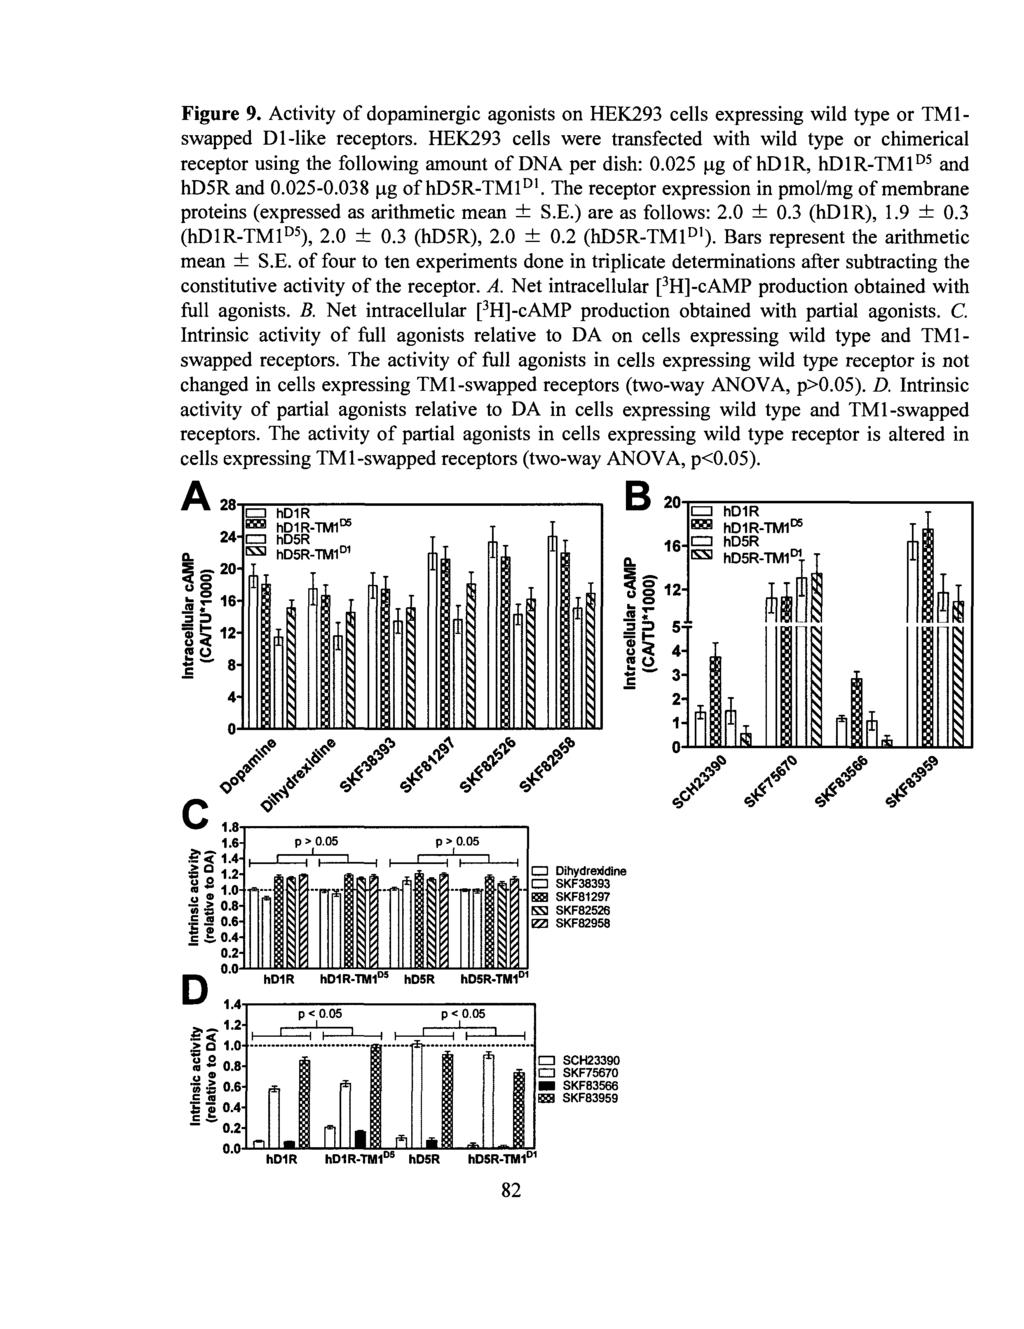 Figure 9. Activity of dopaminergic agonists on HEK293 cells expressing wild type or TM1- swapped Dl-like receptors.